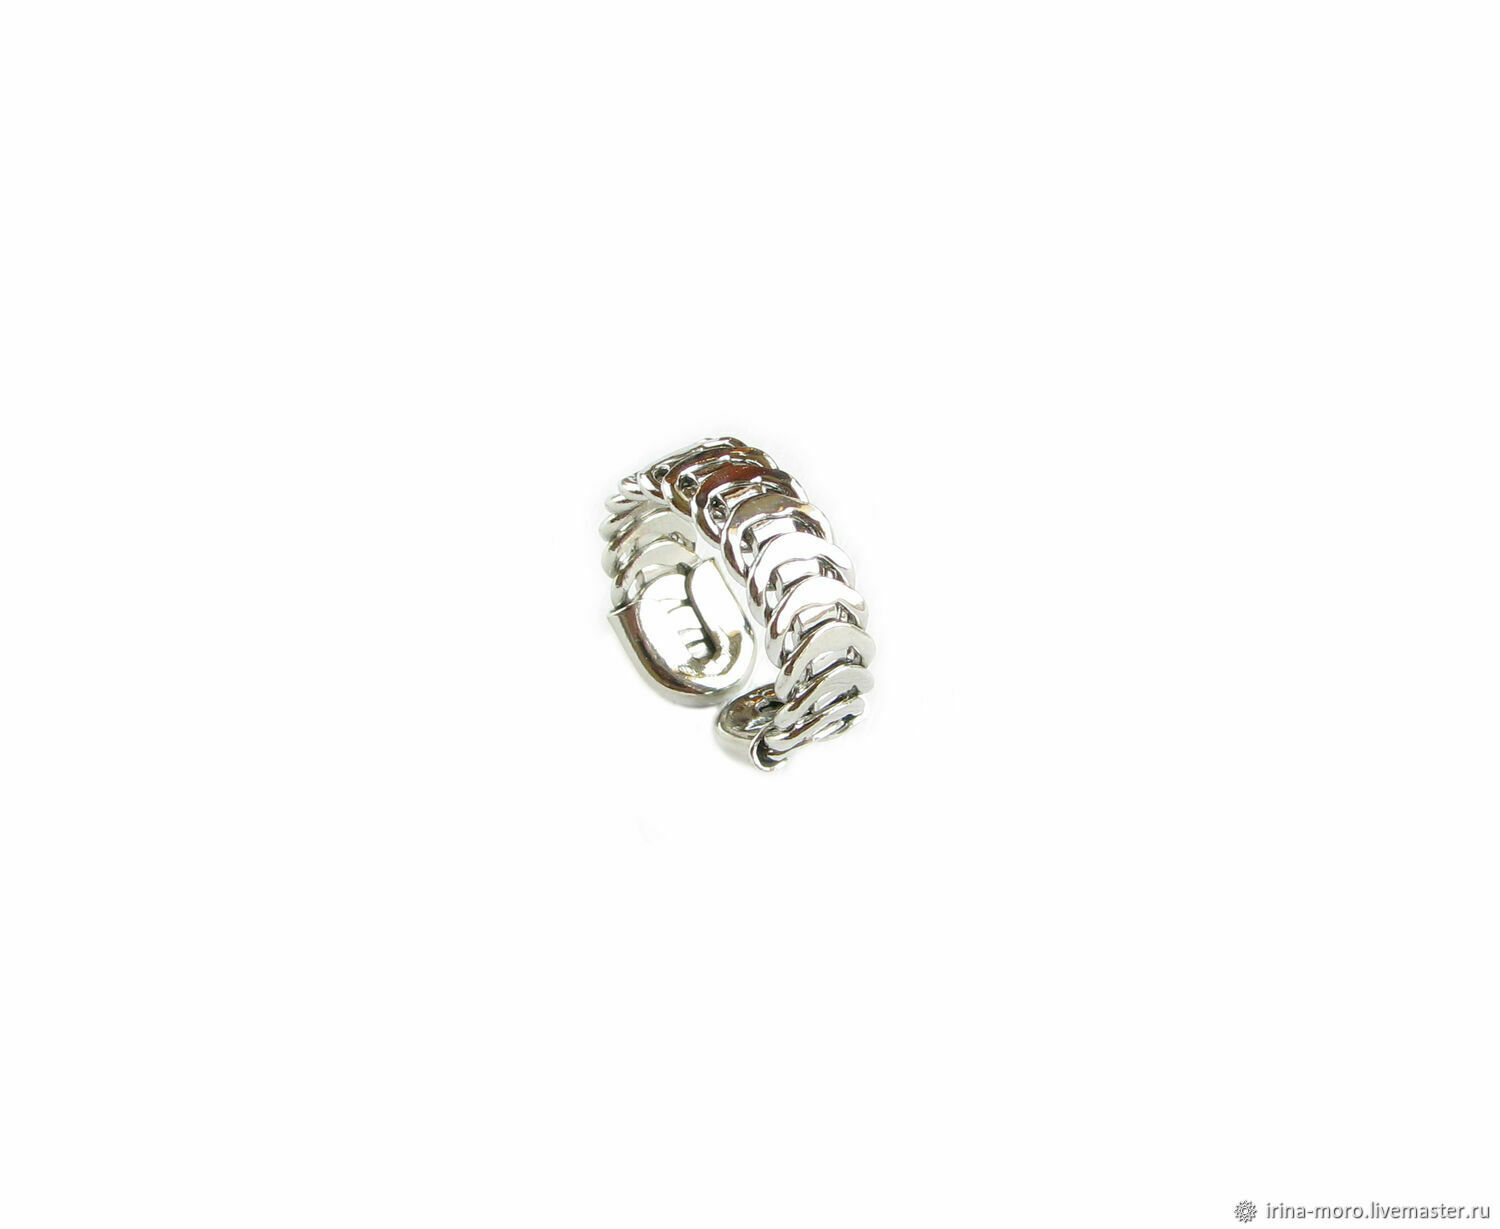 Ring without stones silver, ring without inserts dimensionless ring, Rings, Moscow,  Фото №1